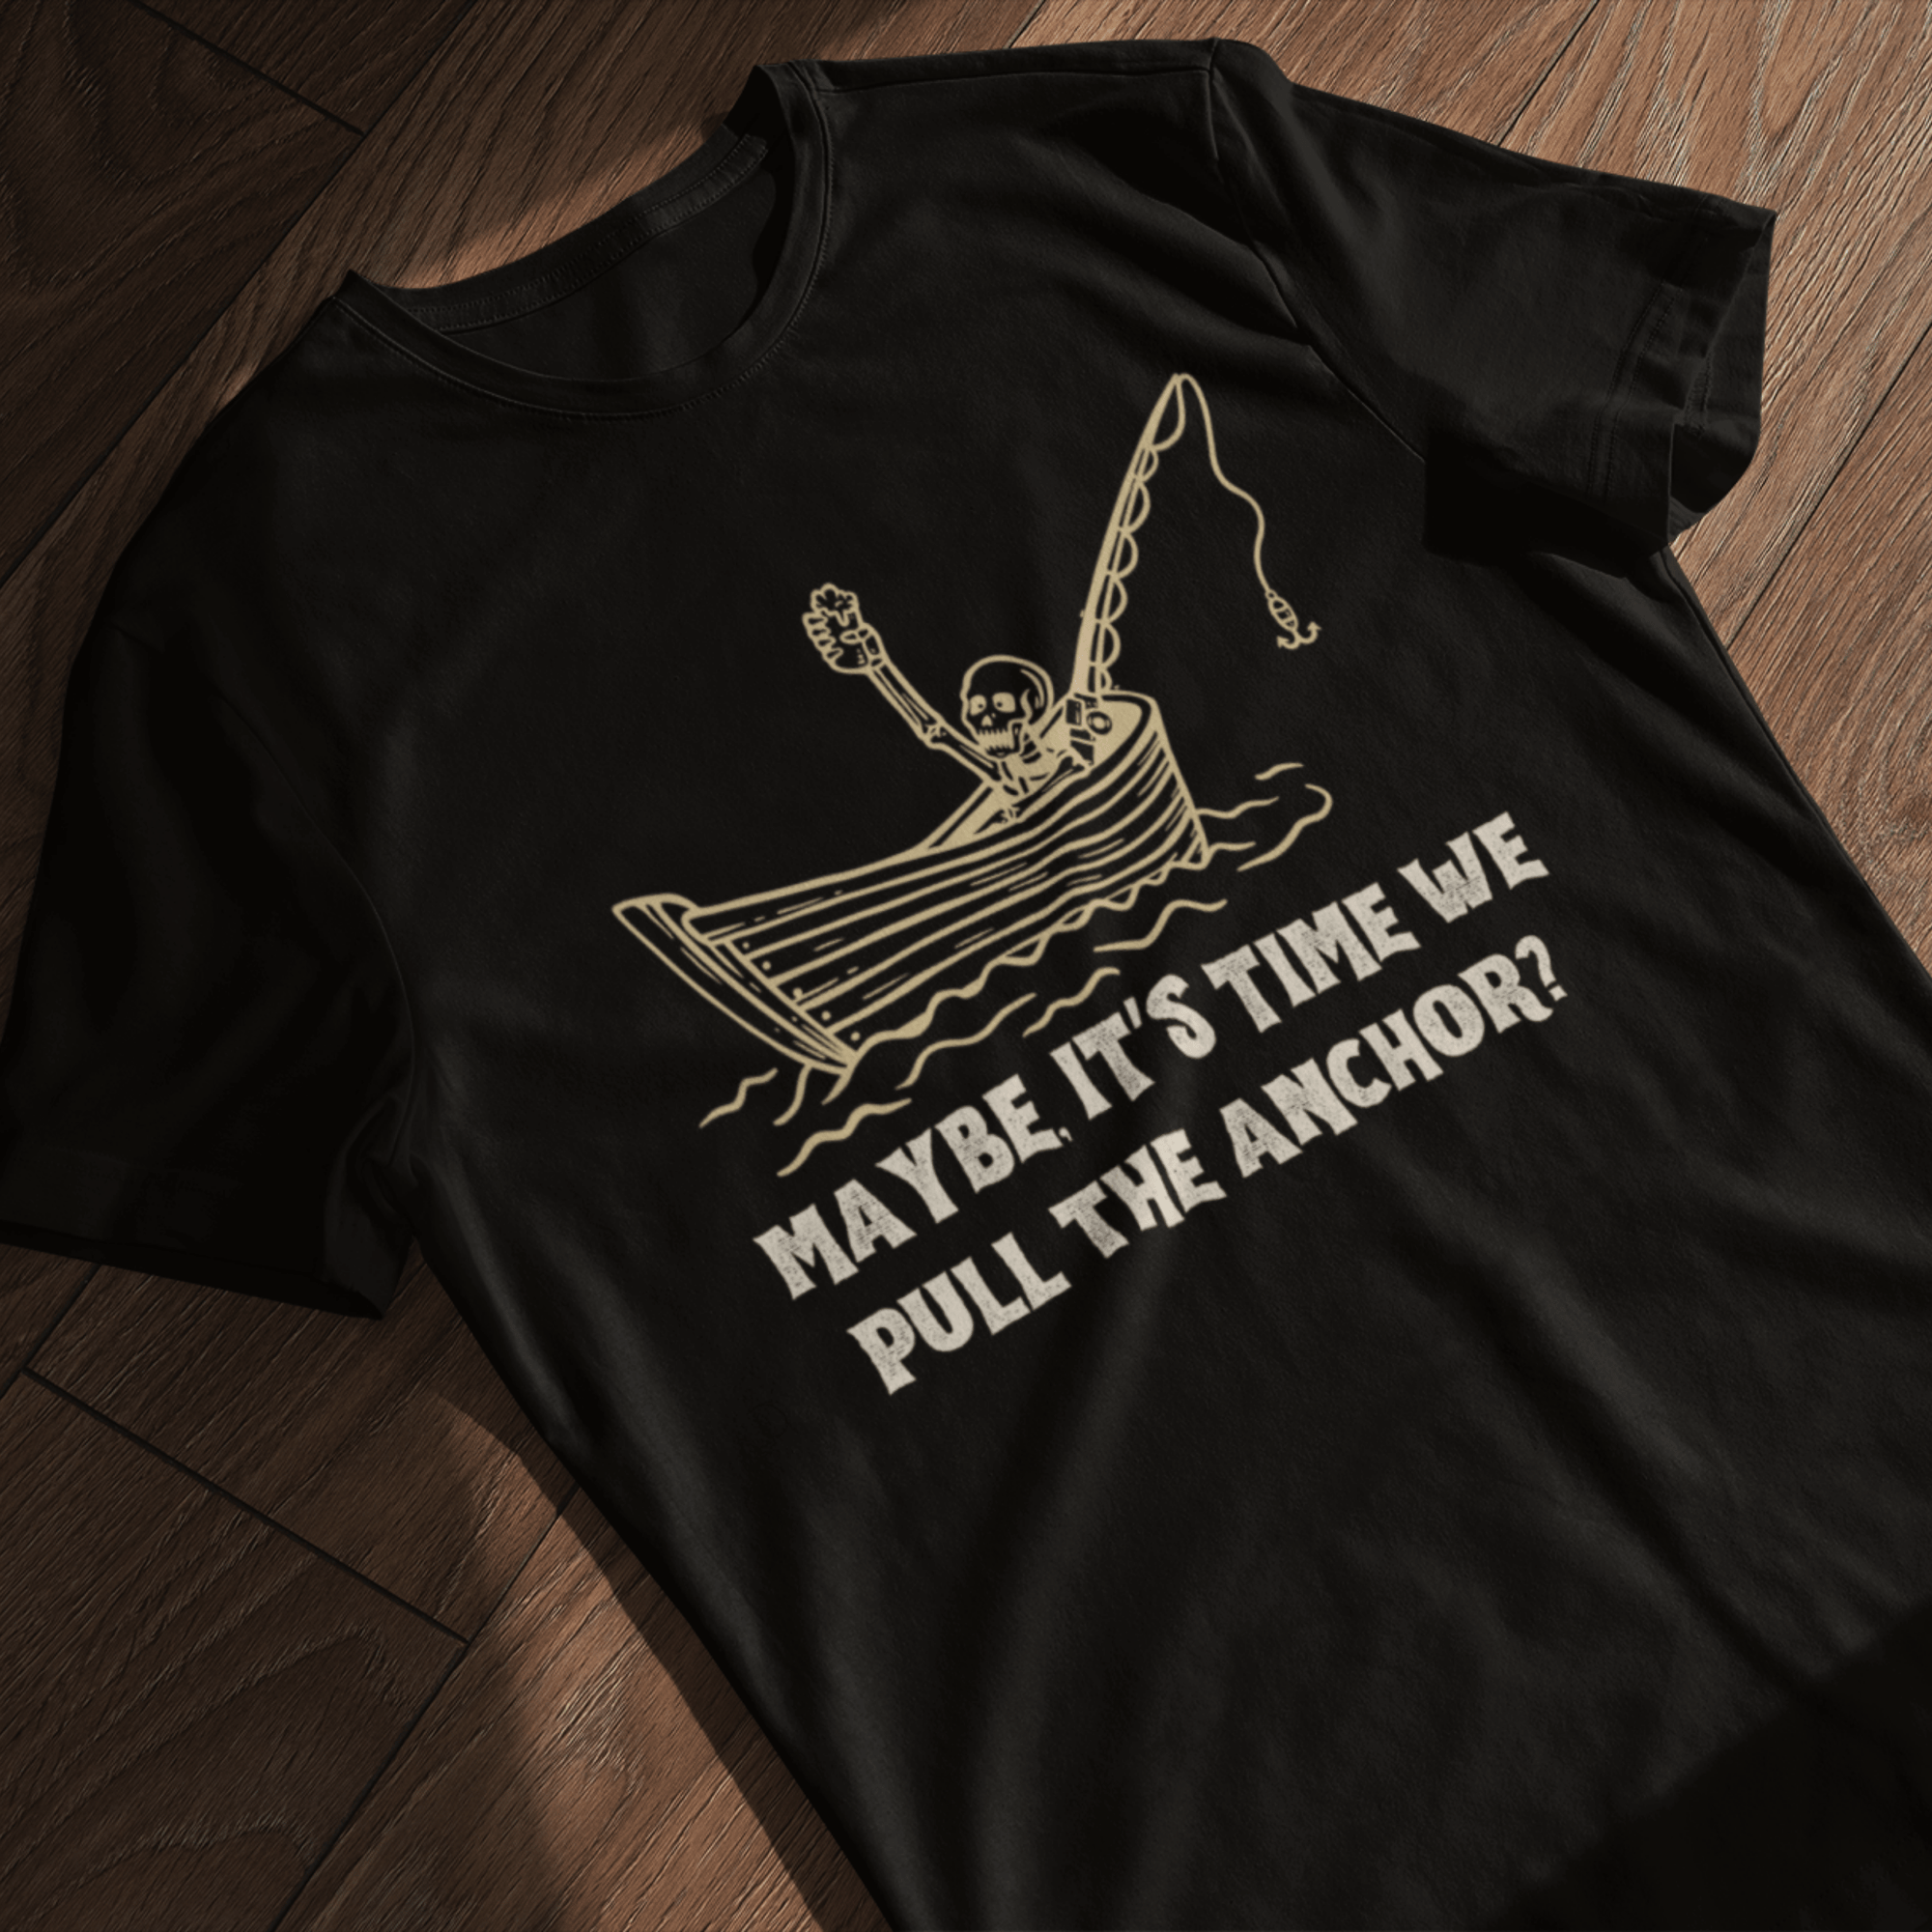 Maybe, It's Time We Pull the Anchor? T-Shirt